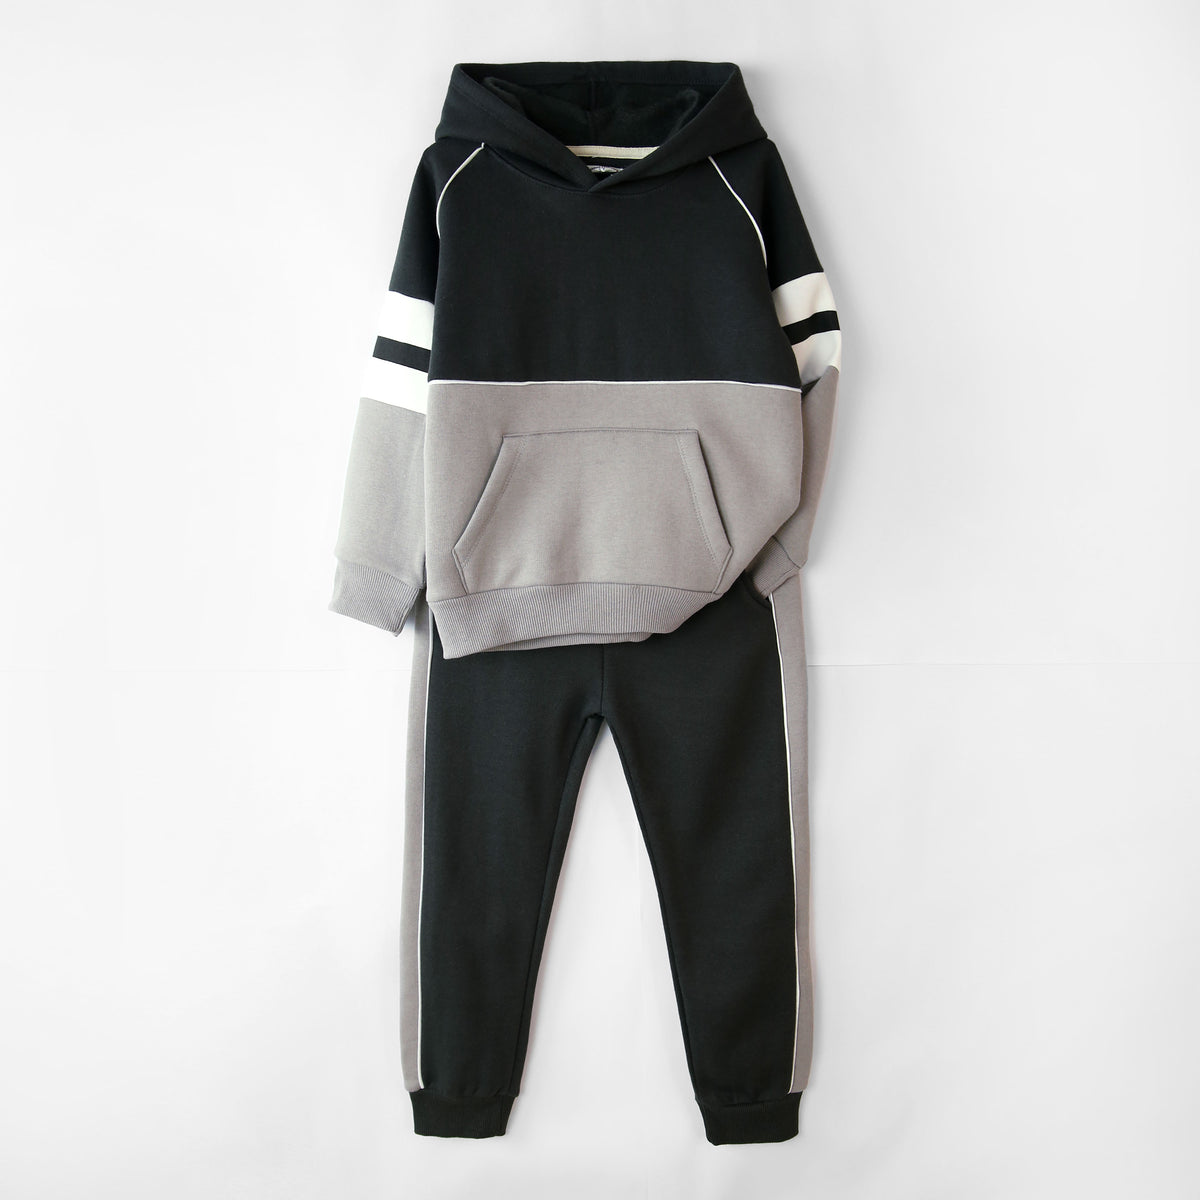 Premium Quality Cut &amp; Sew Style Fleece Tracksuit For Kids